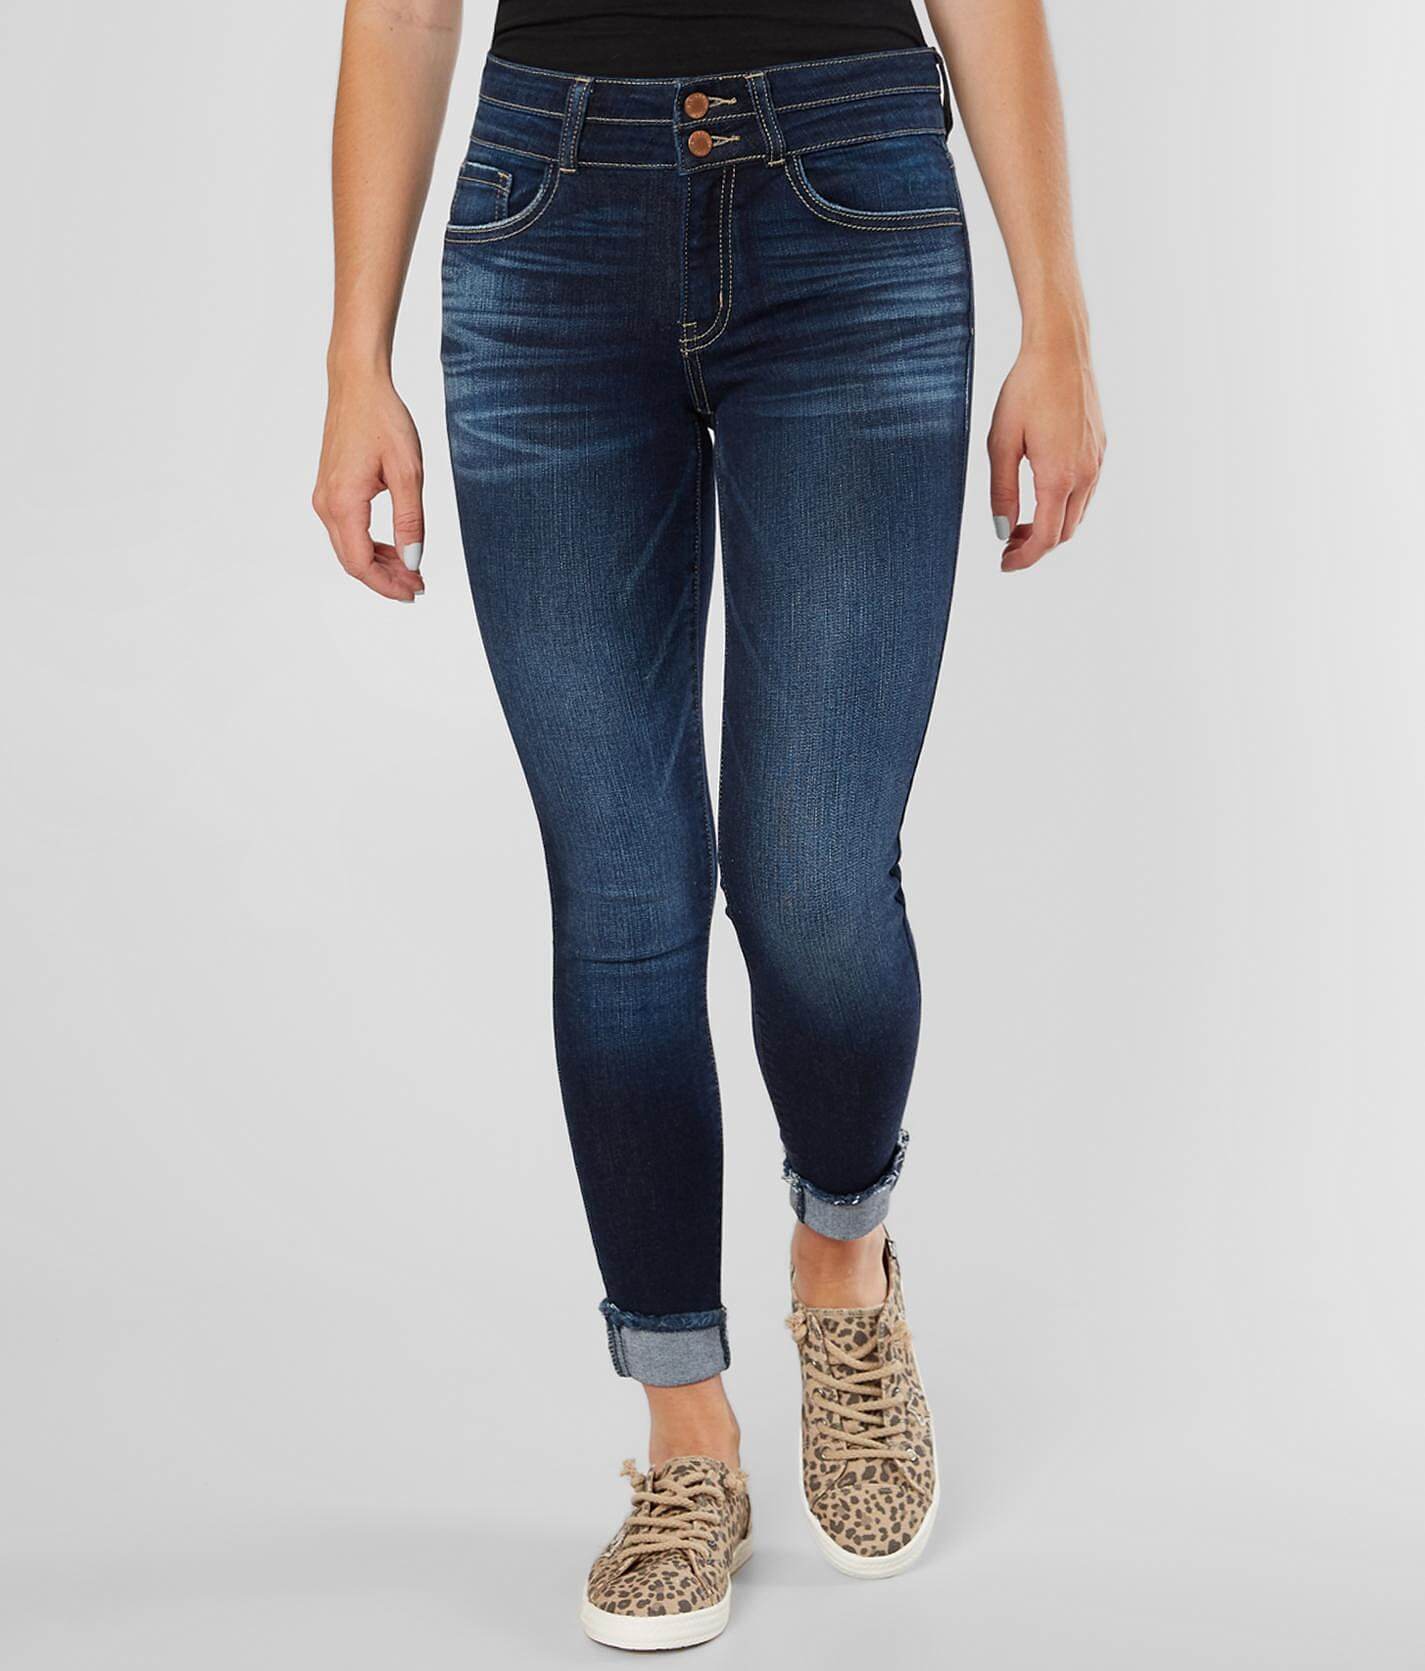 cuffed ankle jeans